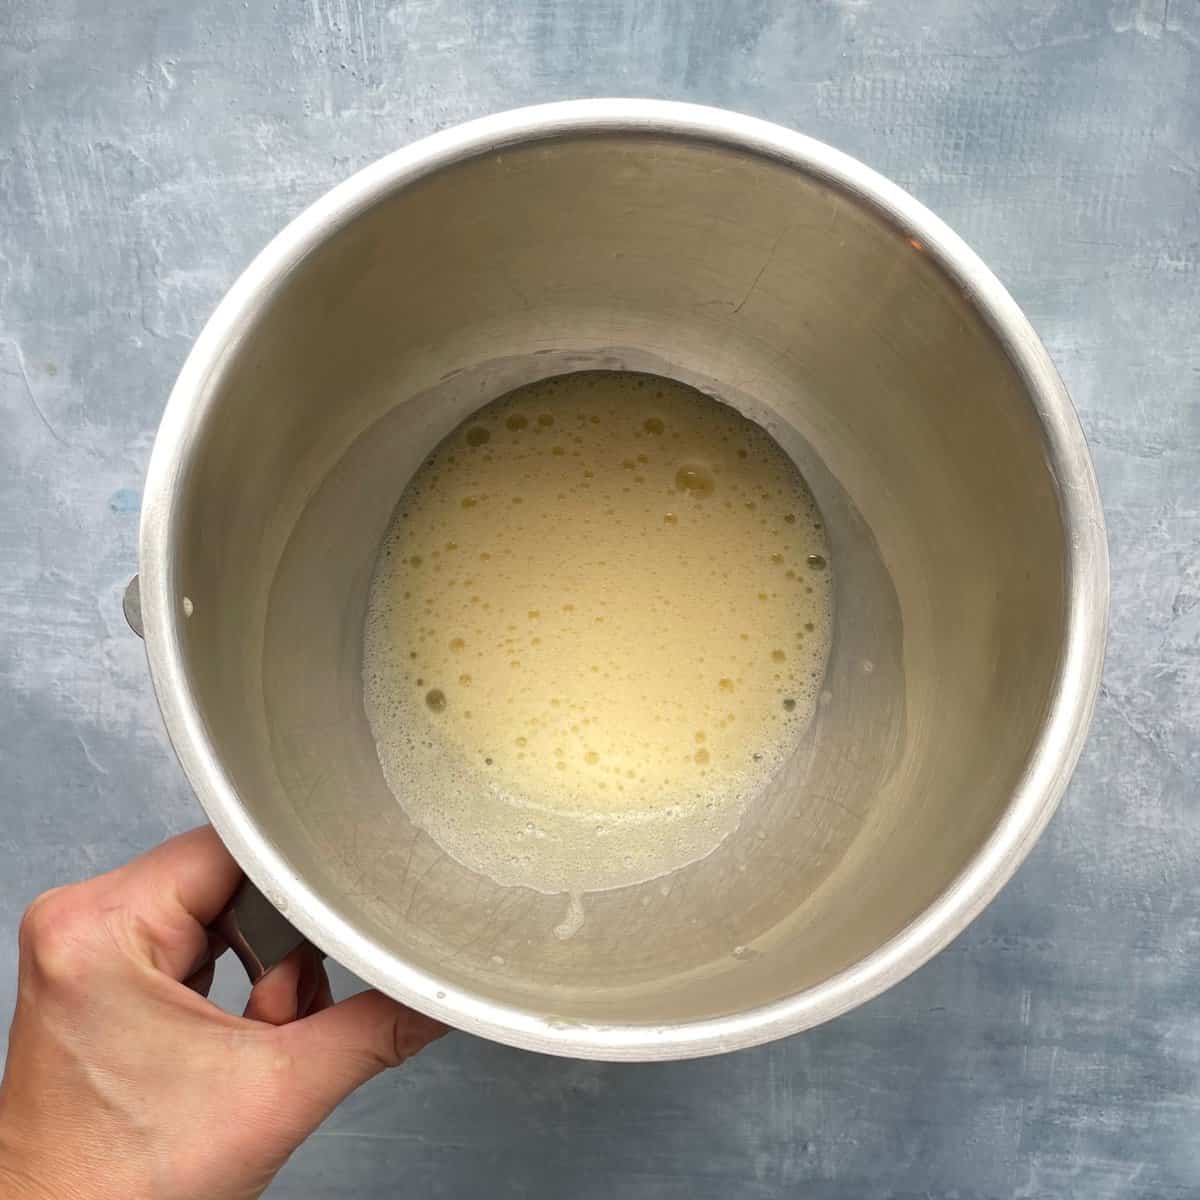 hand holding metal mixing bowl with pale yellow, frothy eggs.